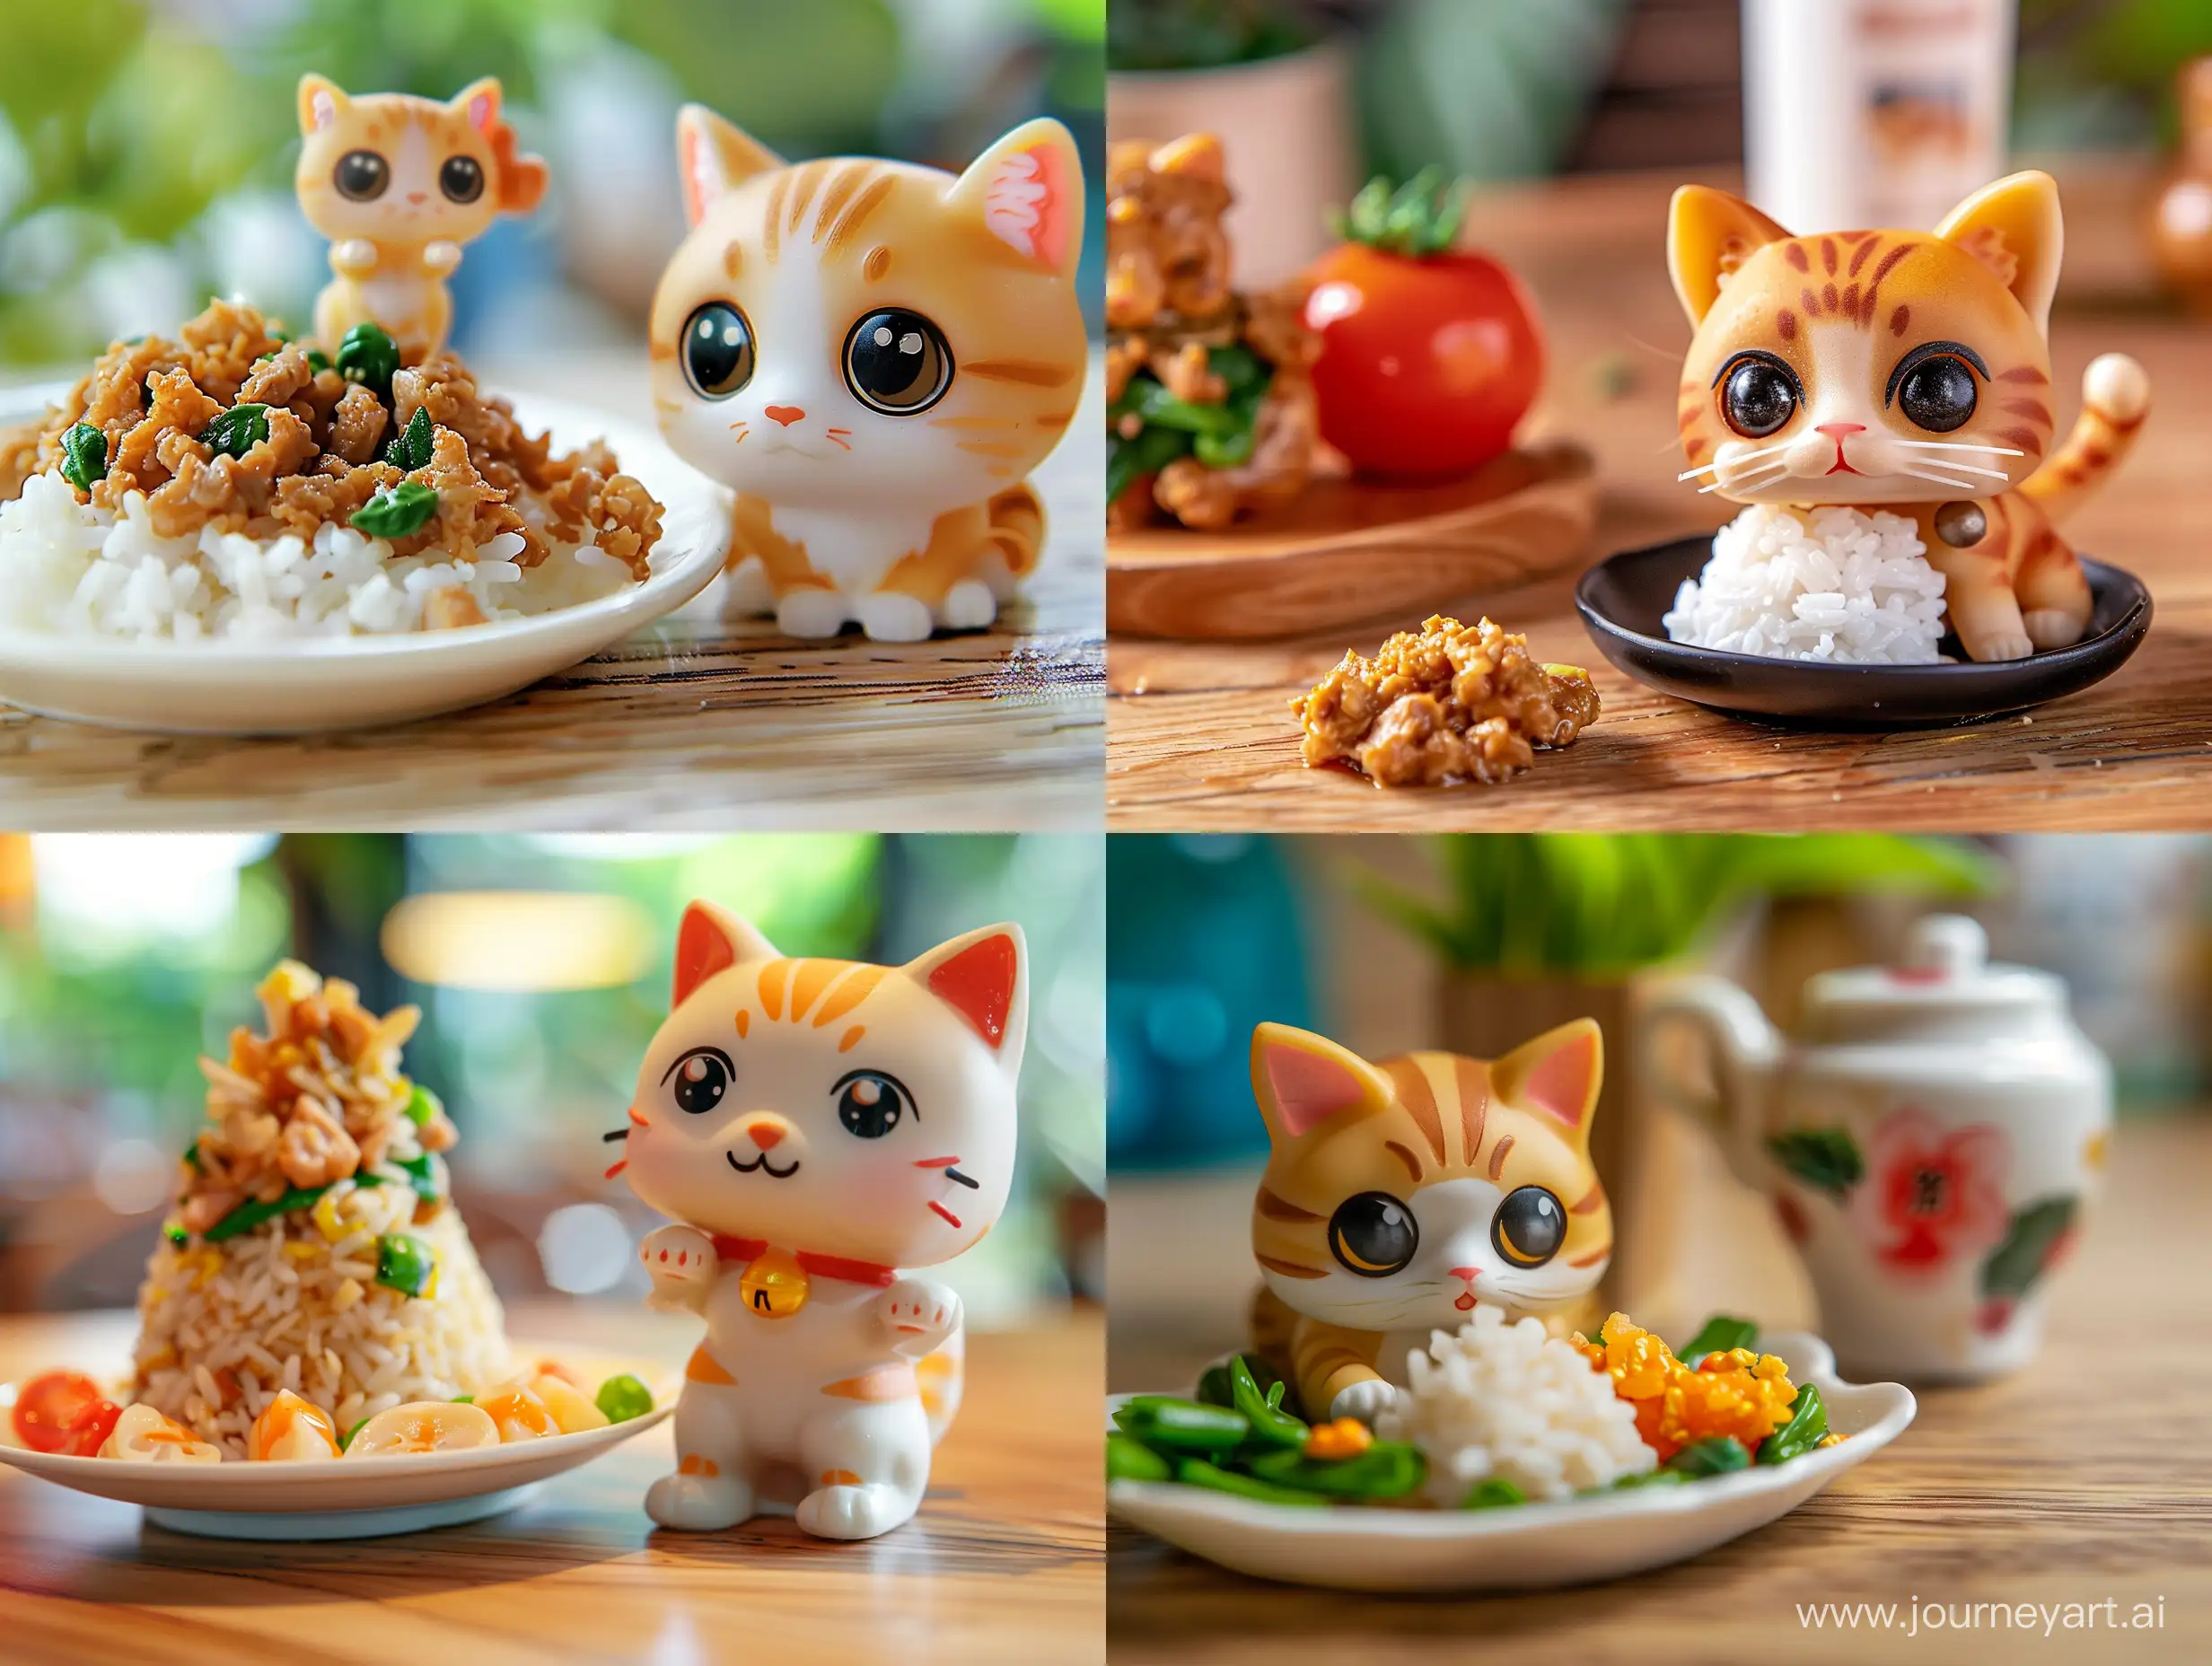 Thai-Holy-Basil-Fried-Mince-Pork-with-Rice-Dish-Featuring-a-Playful-Cat-Action-Figure